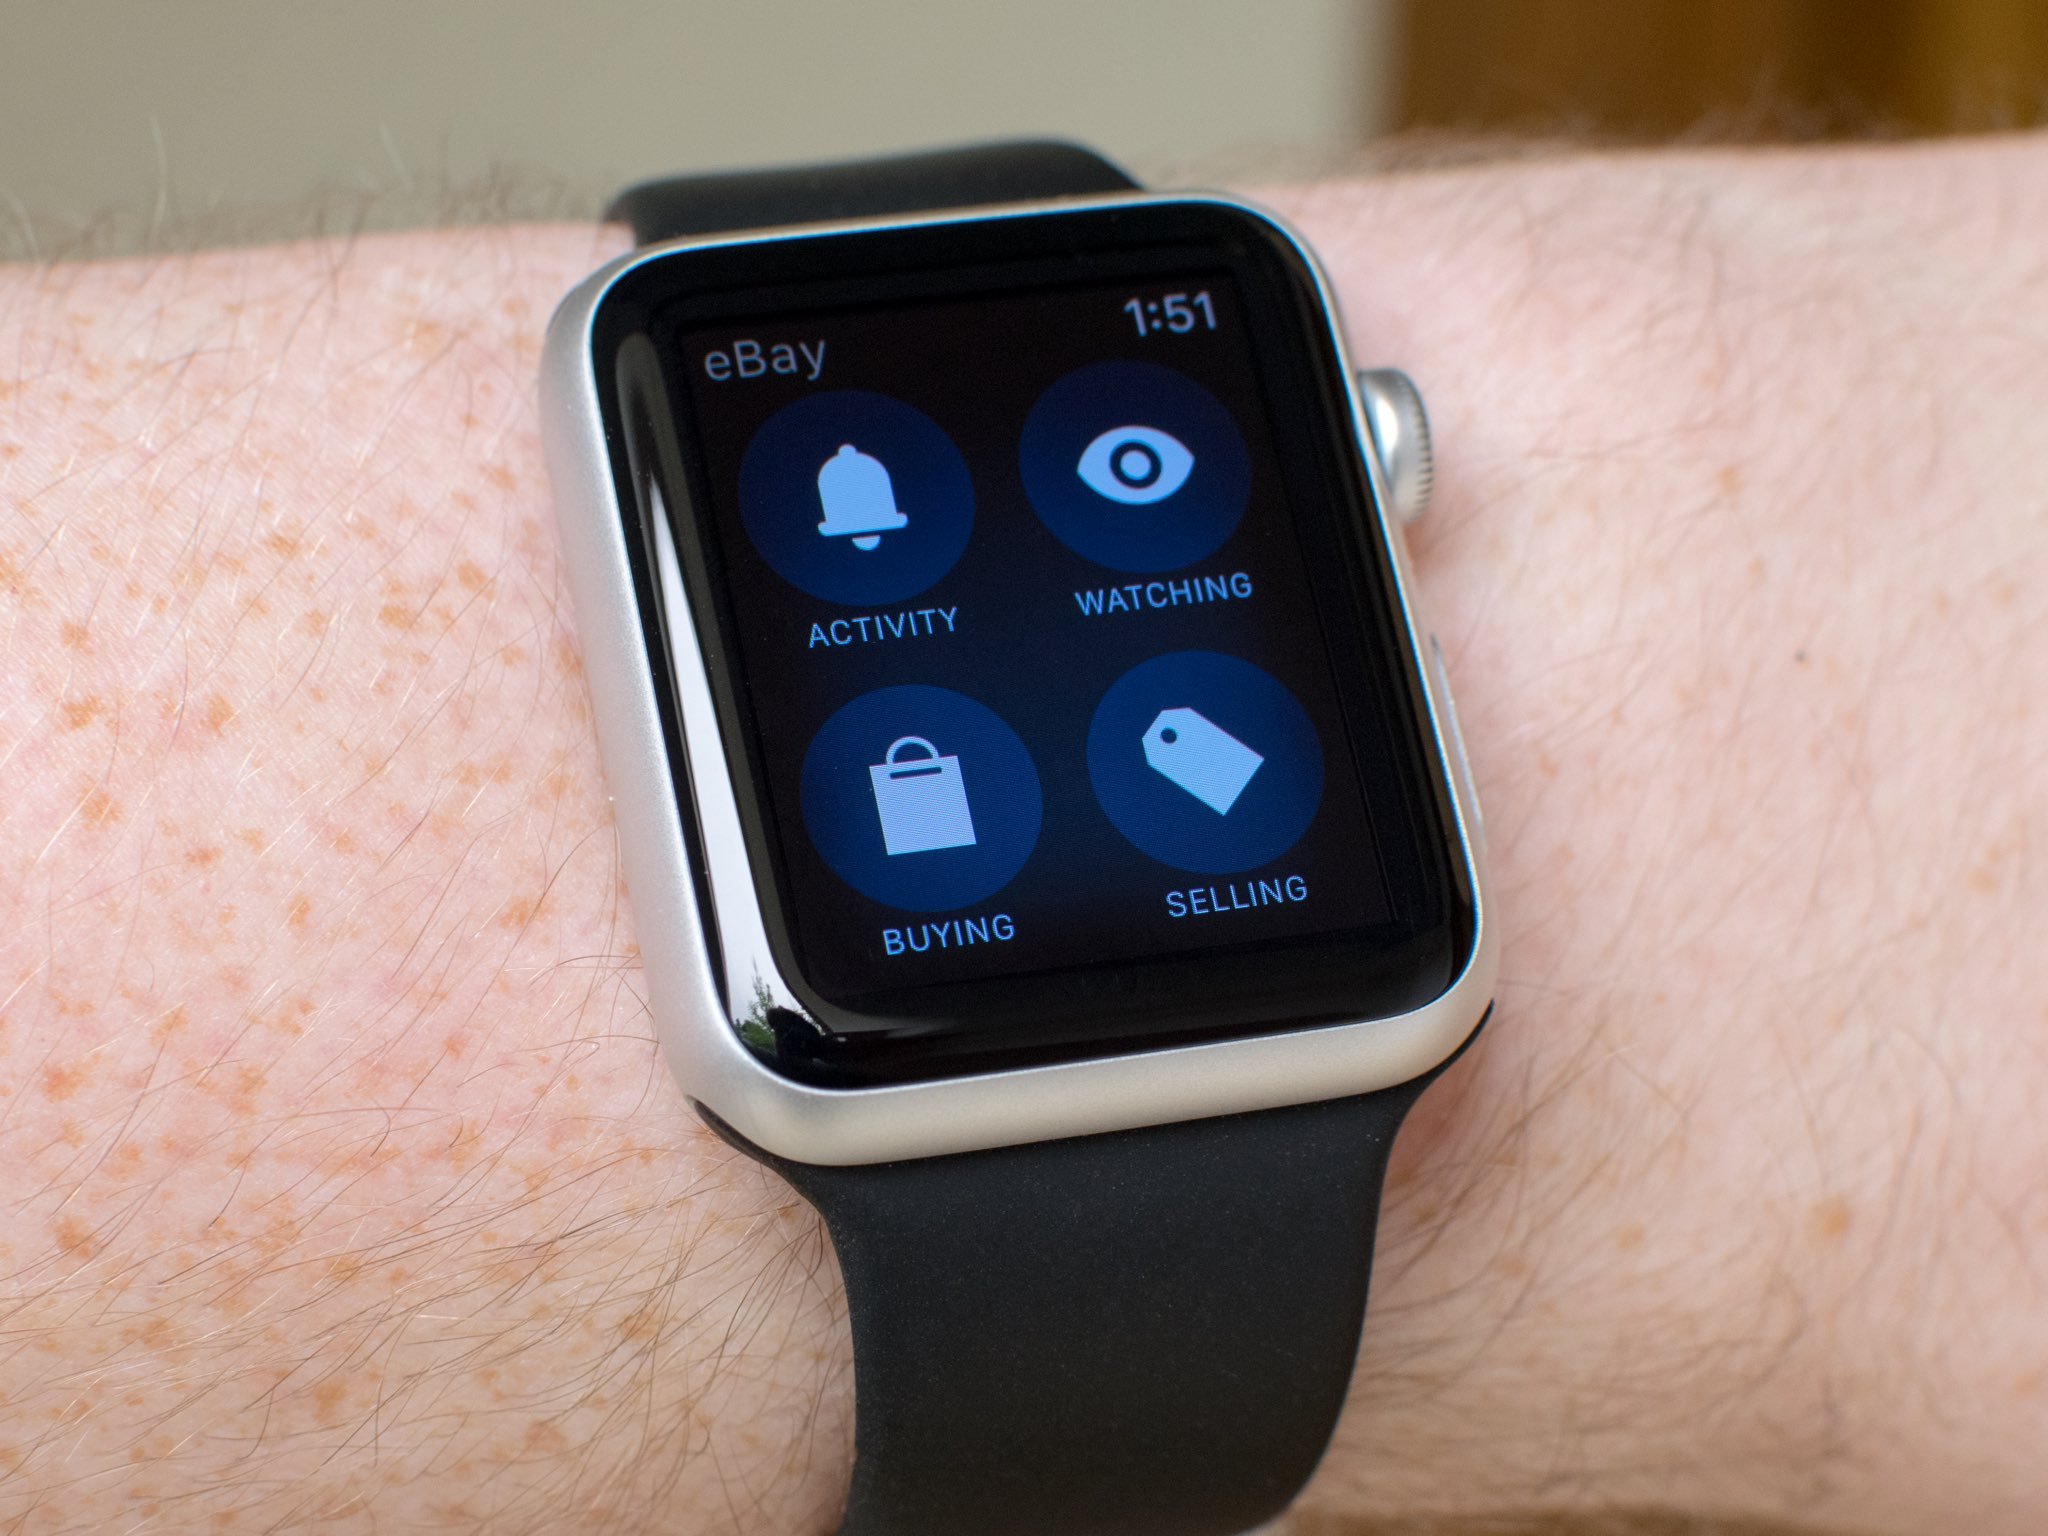 You can now manage your eBay bids right from your Apple Watch